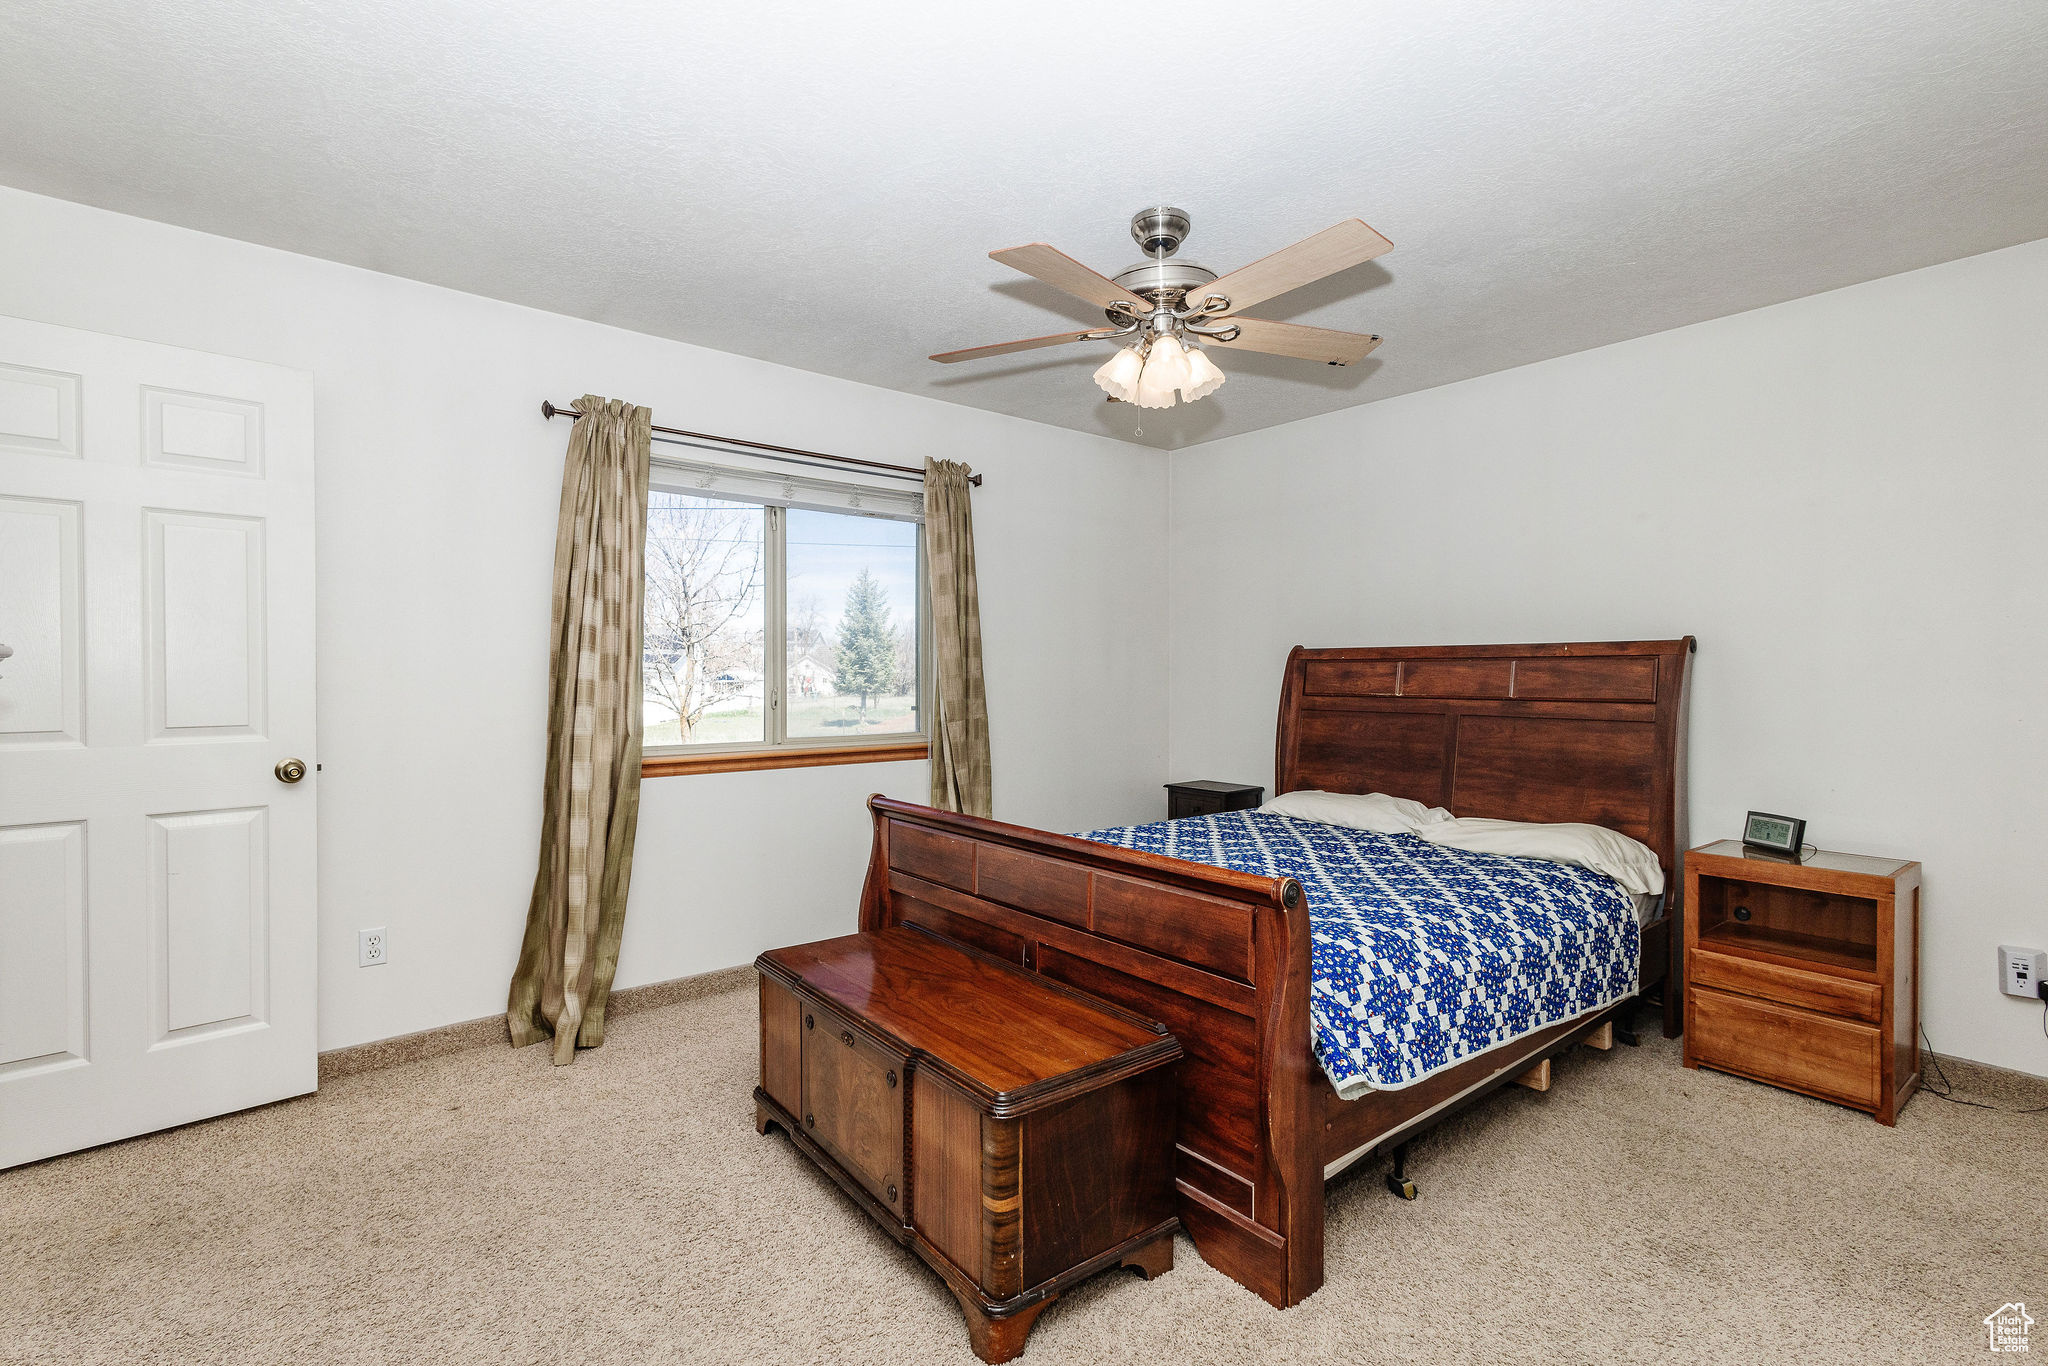 Owner's Suite: Carpeted, wood trim and ceiling fan.